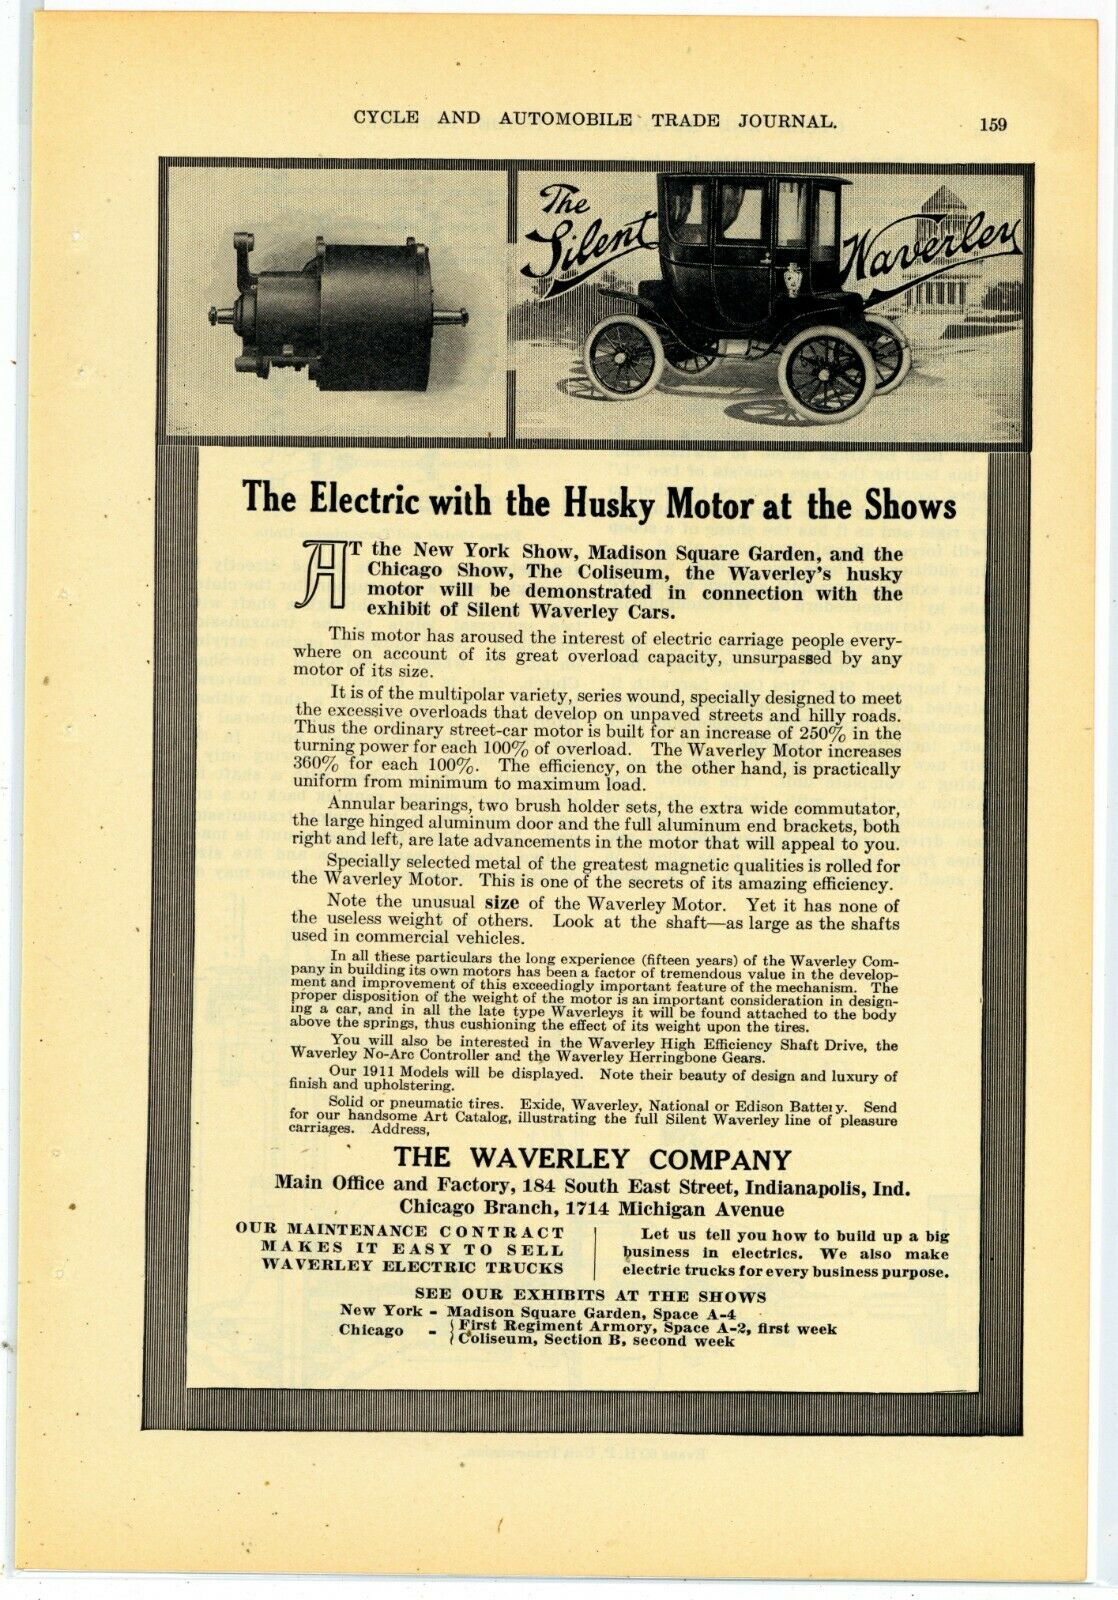 1911 Waverly Electric Carriage Ad: "the Silent Waverly" - Indianapolis, Indiana